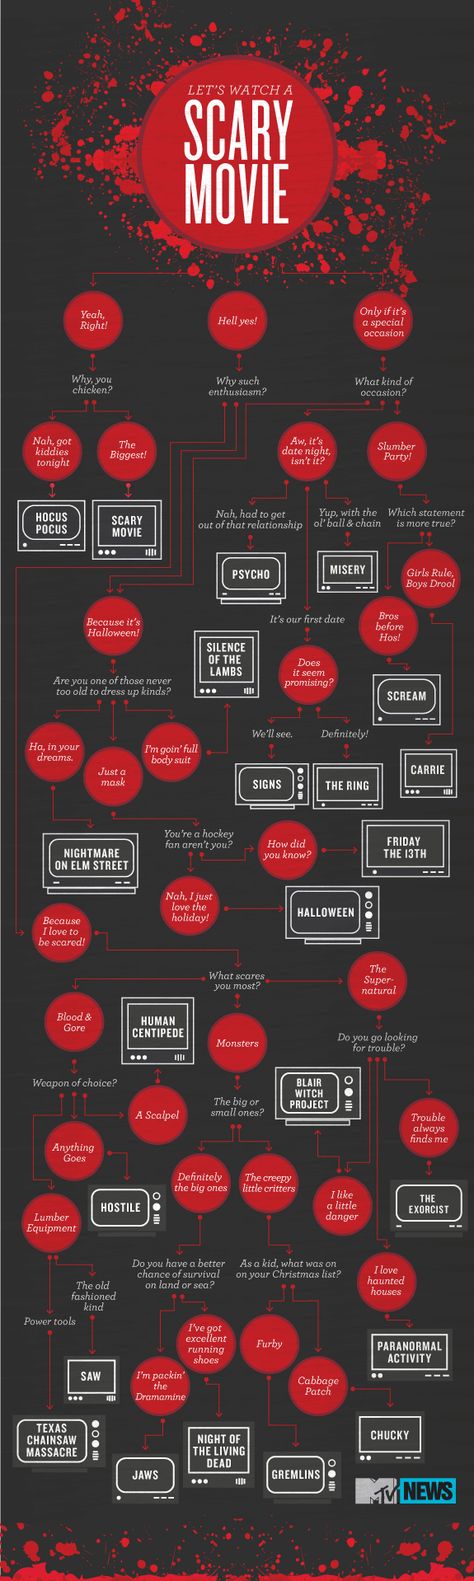 Horror movies Humour, Horror Films, Scarie Movie, Movie Infographic, The Human Centipede, Halloween Music, Halloween Movies, Halloween Horror, Scary Movies